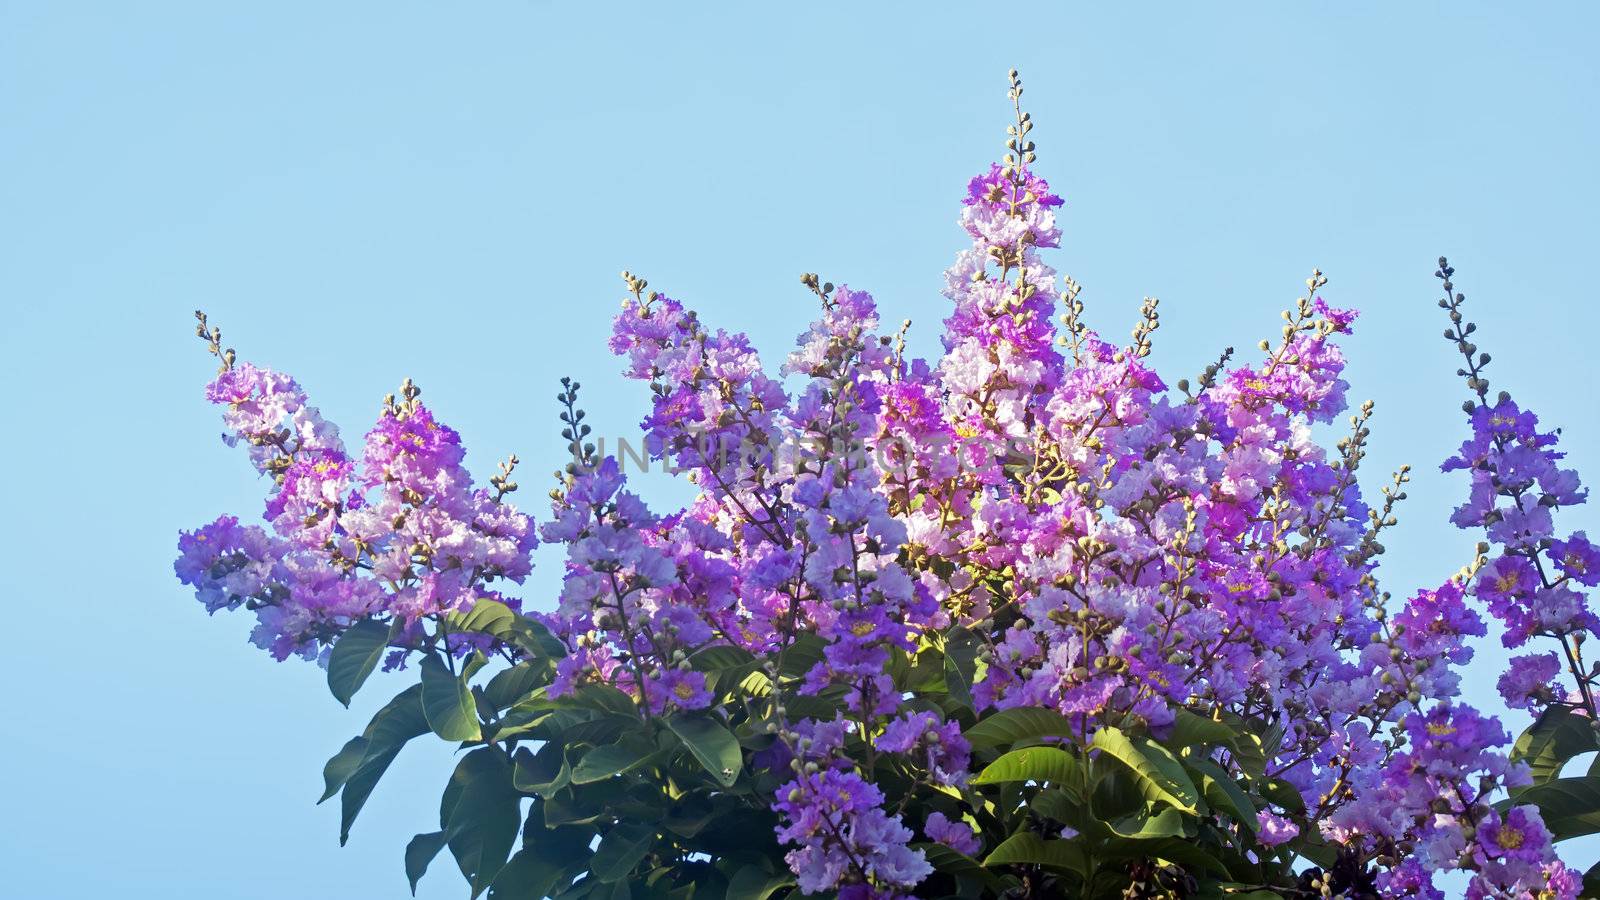 Crape myrtle flowers by xfdly5